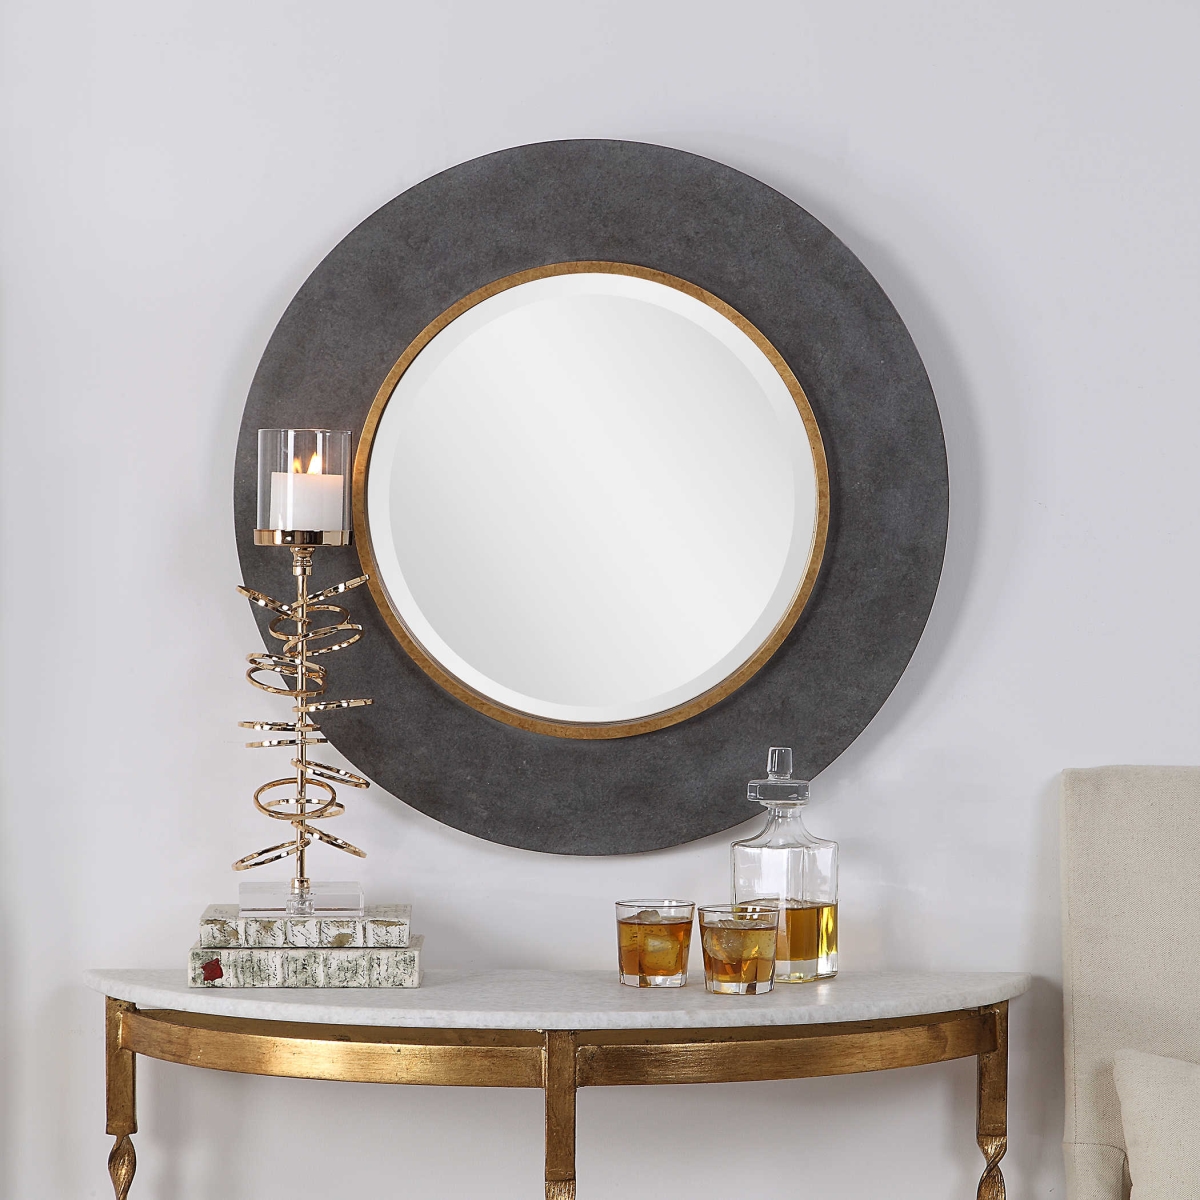 Picture of 212 Main 09491 Saul Round Mirror